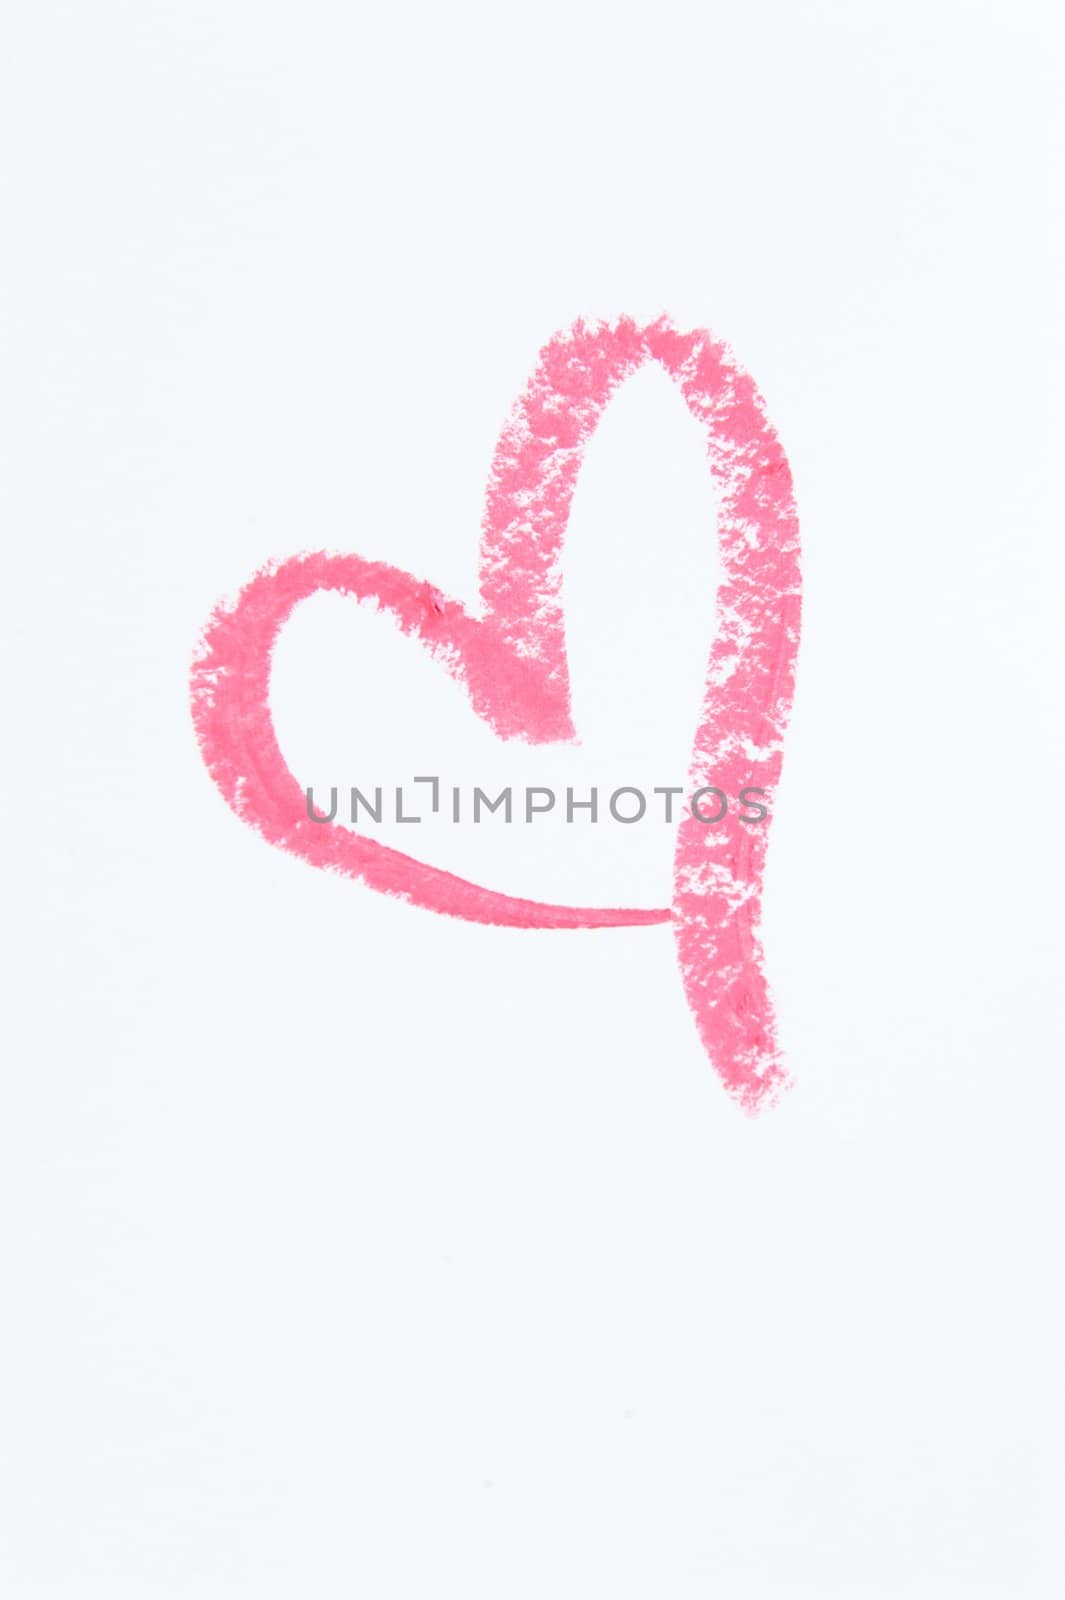 Single Pink Lipstick Heart on White Paper by pixelsnap